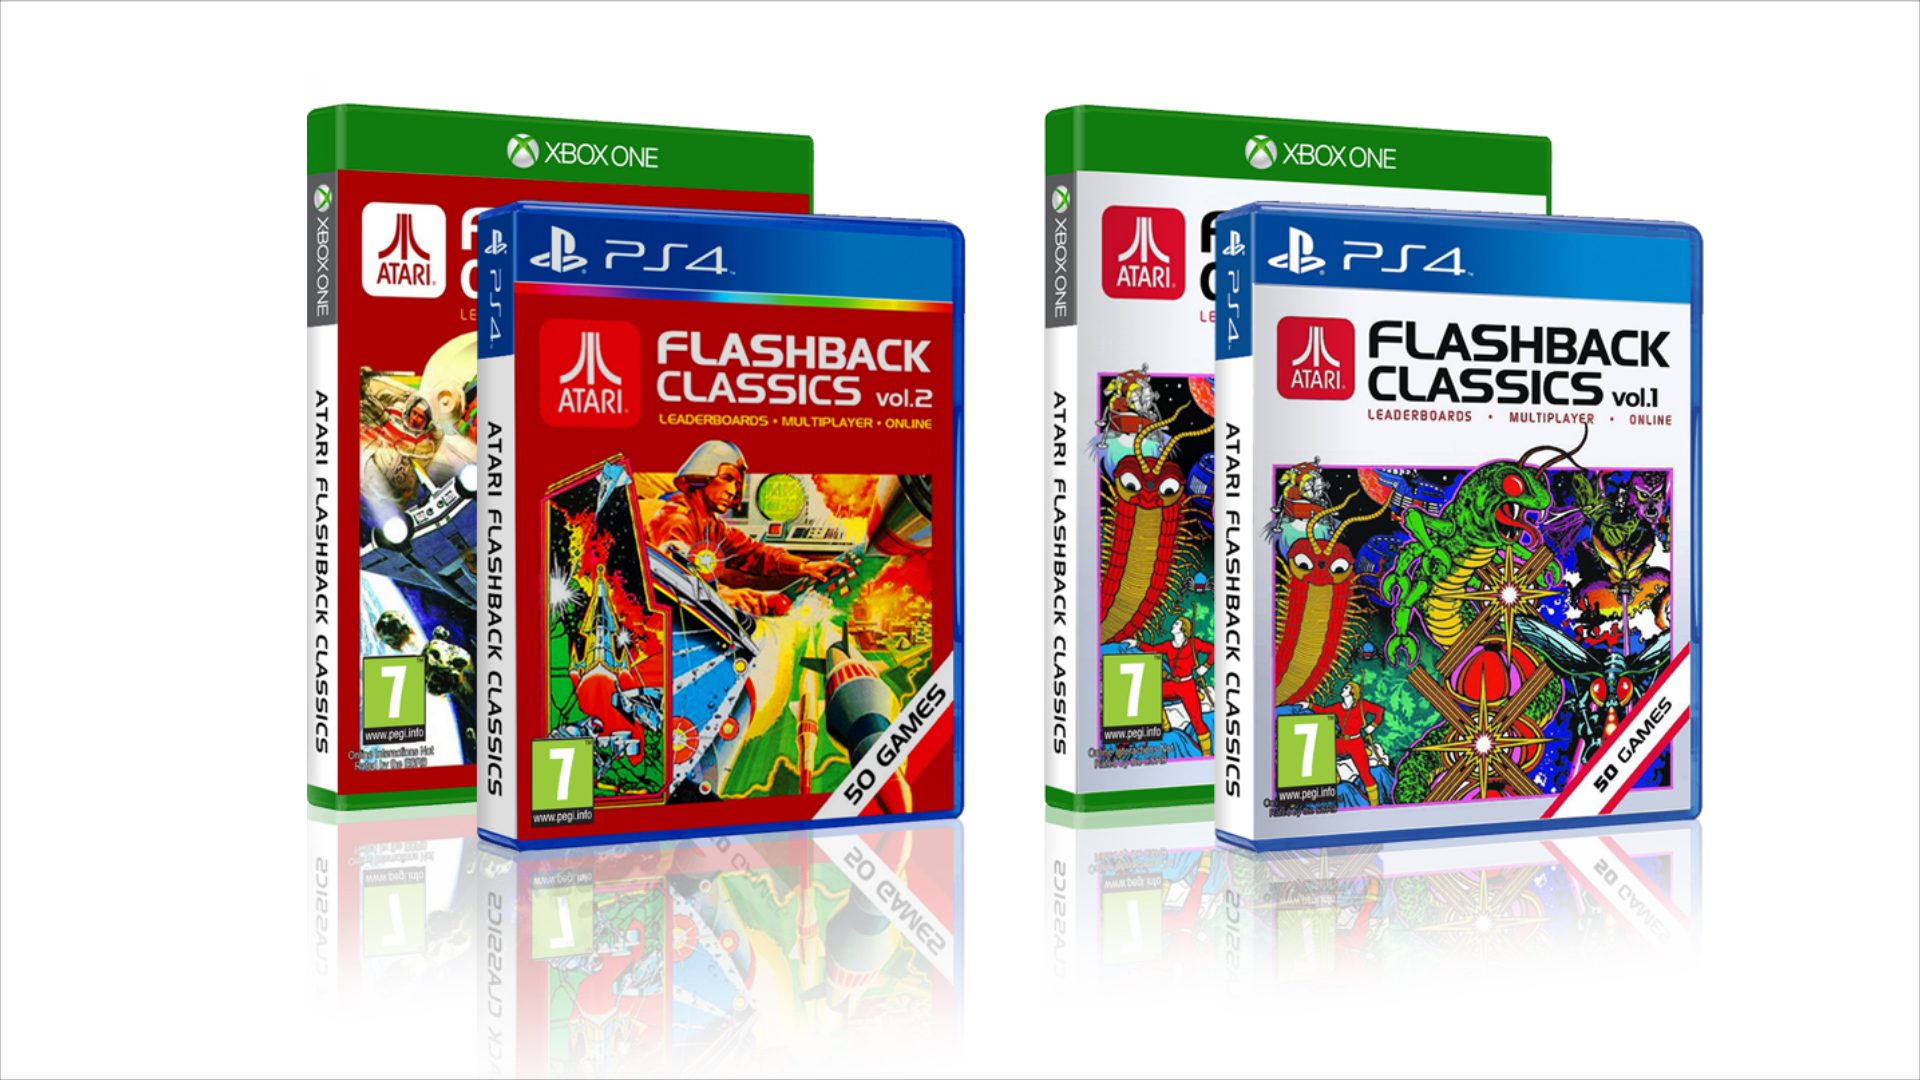 100 Atari games are coming to PS4 and Xbox One in the Atari Flashback Classics – Volumes 1 and 2